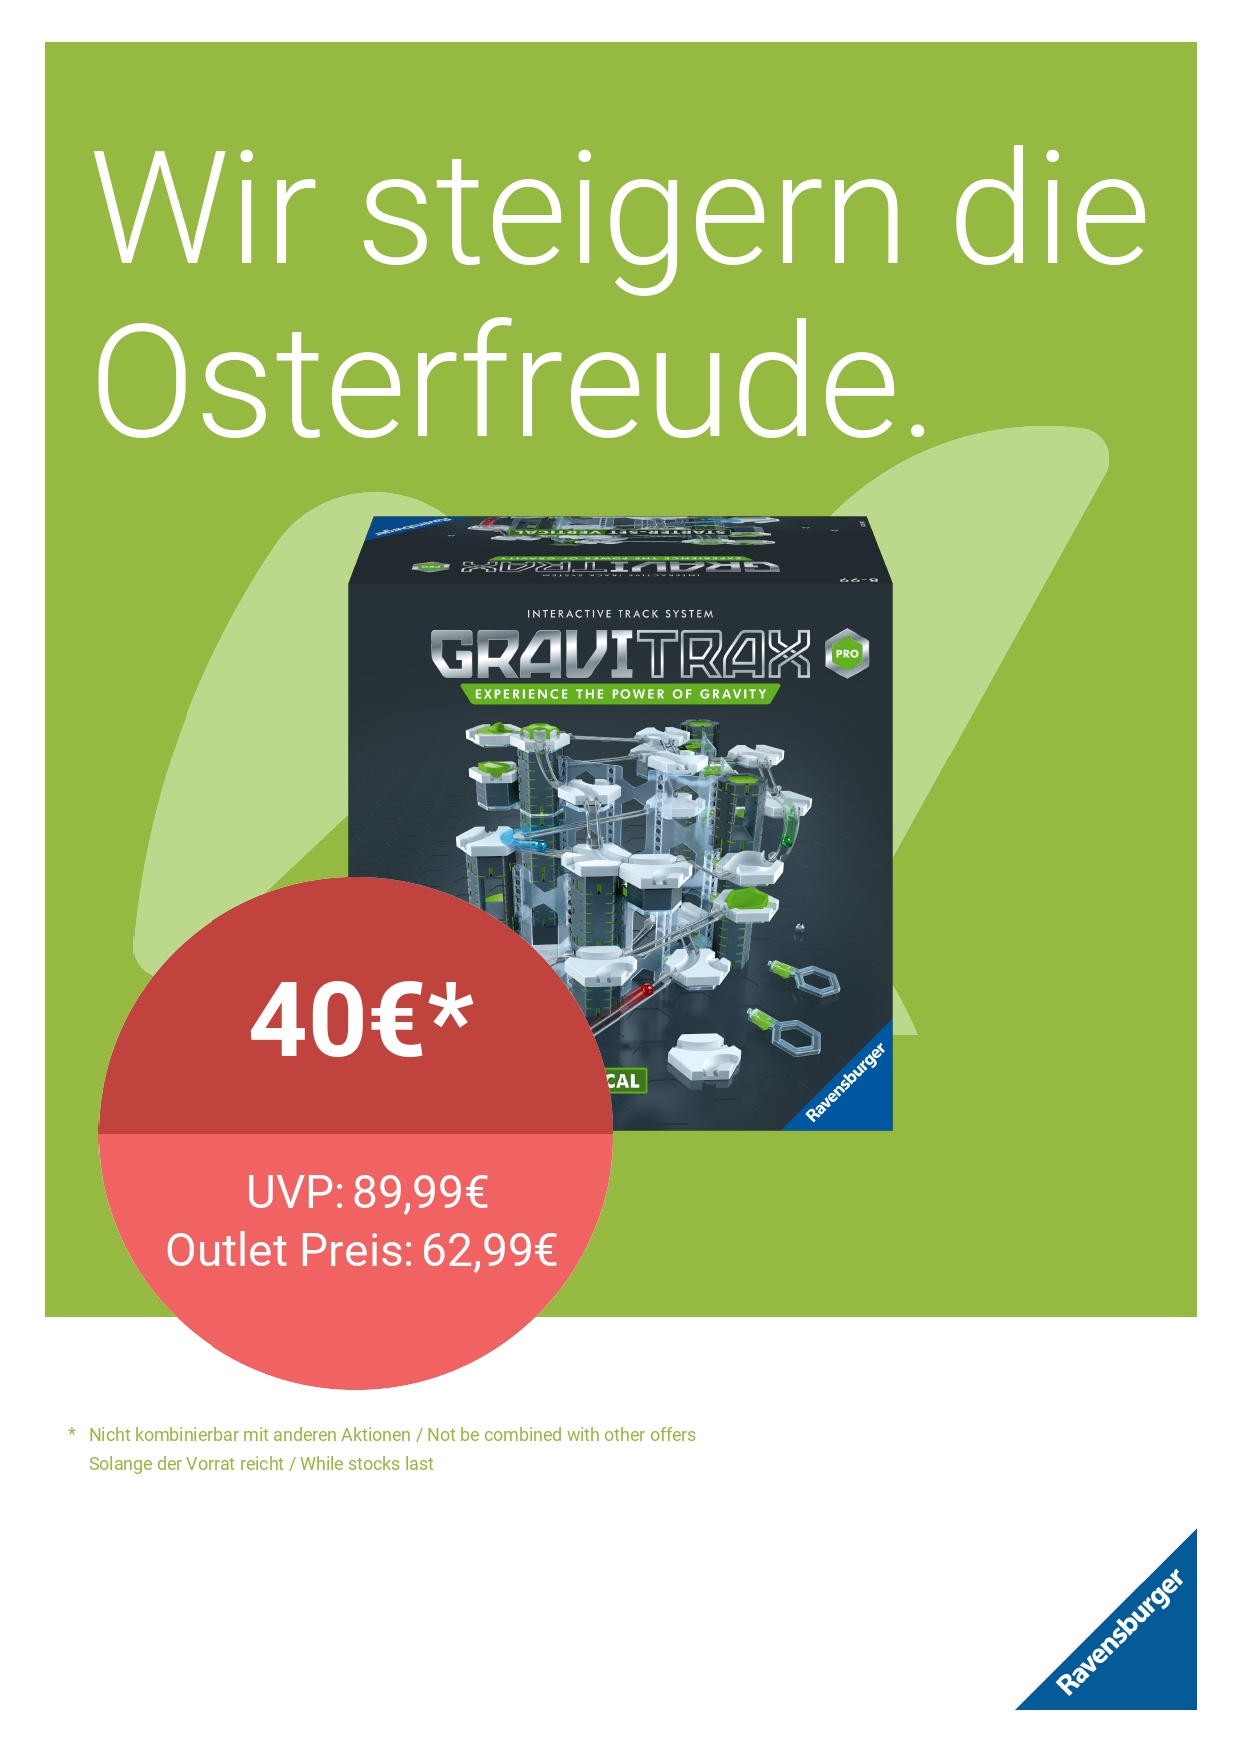 Gravitrax - Osterspecial City Outlet Bad Münstereifel